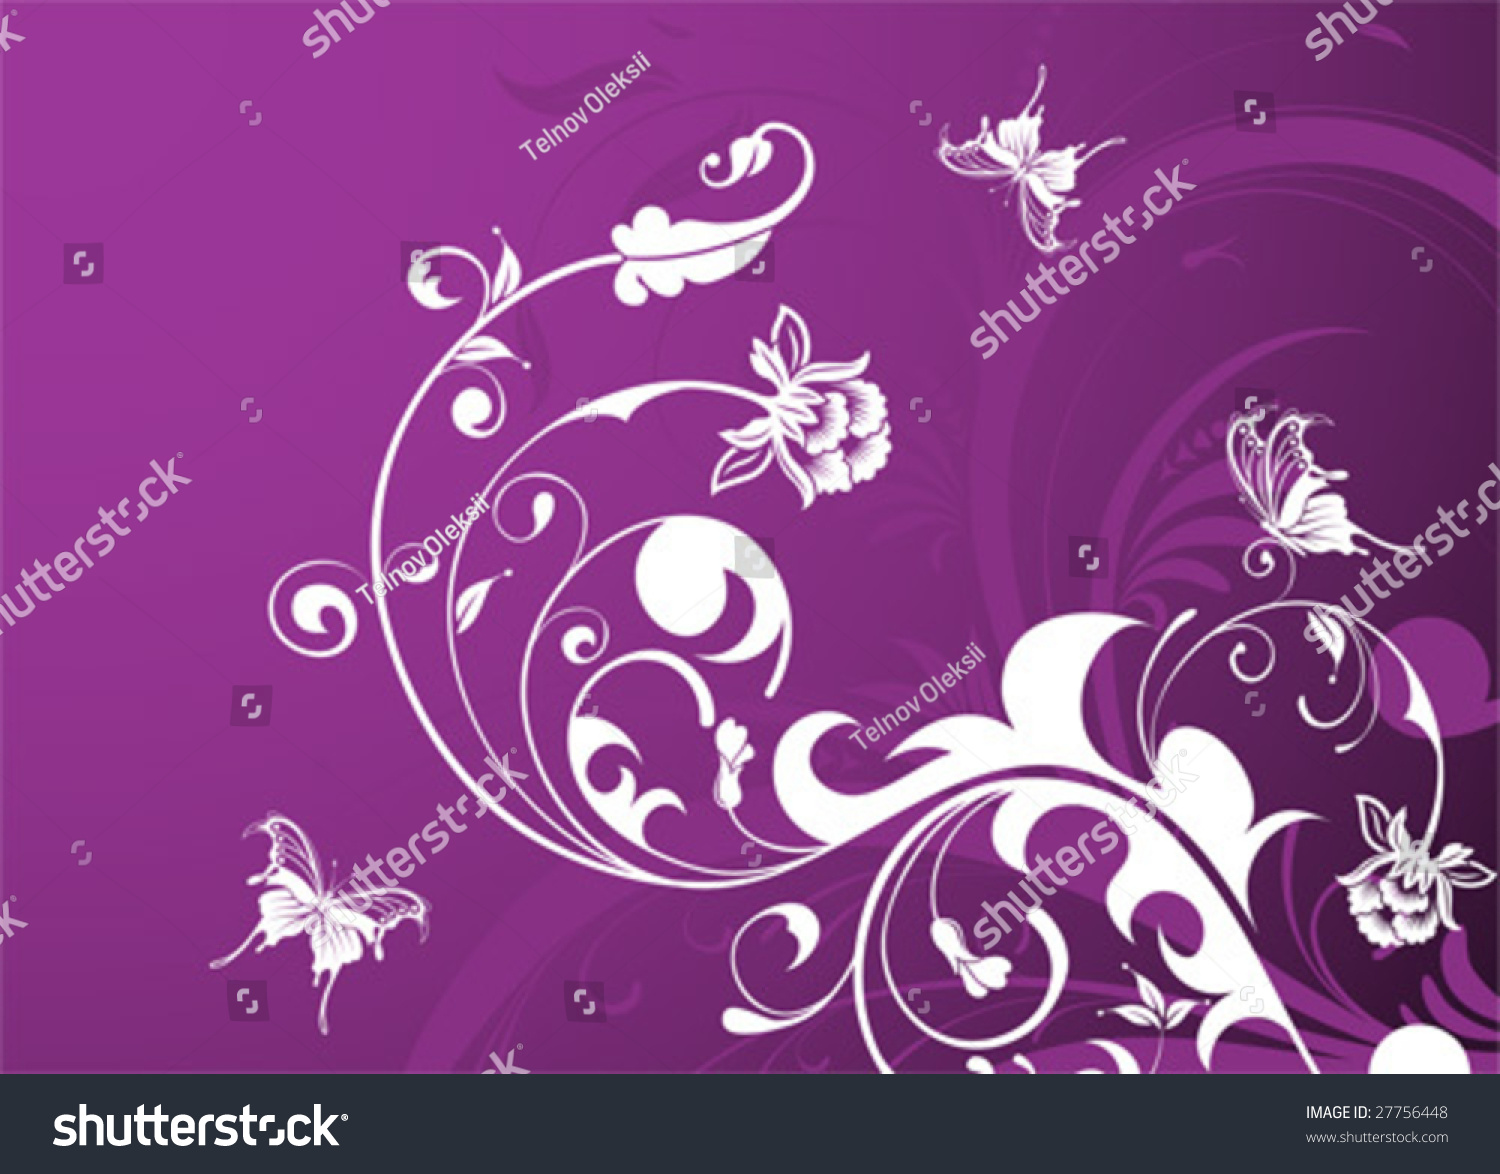 Abstract Floral Background With Butterfly, Element For Design, Vector ...